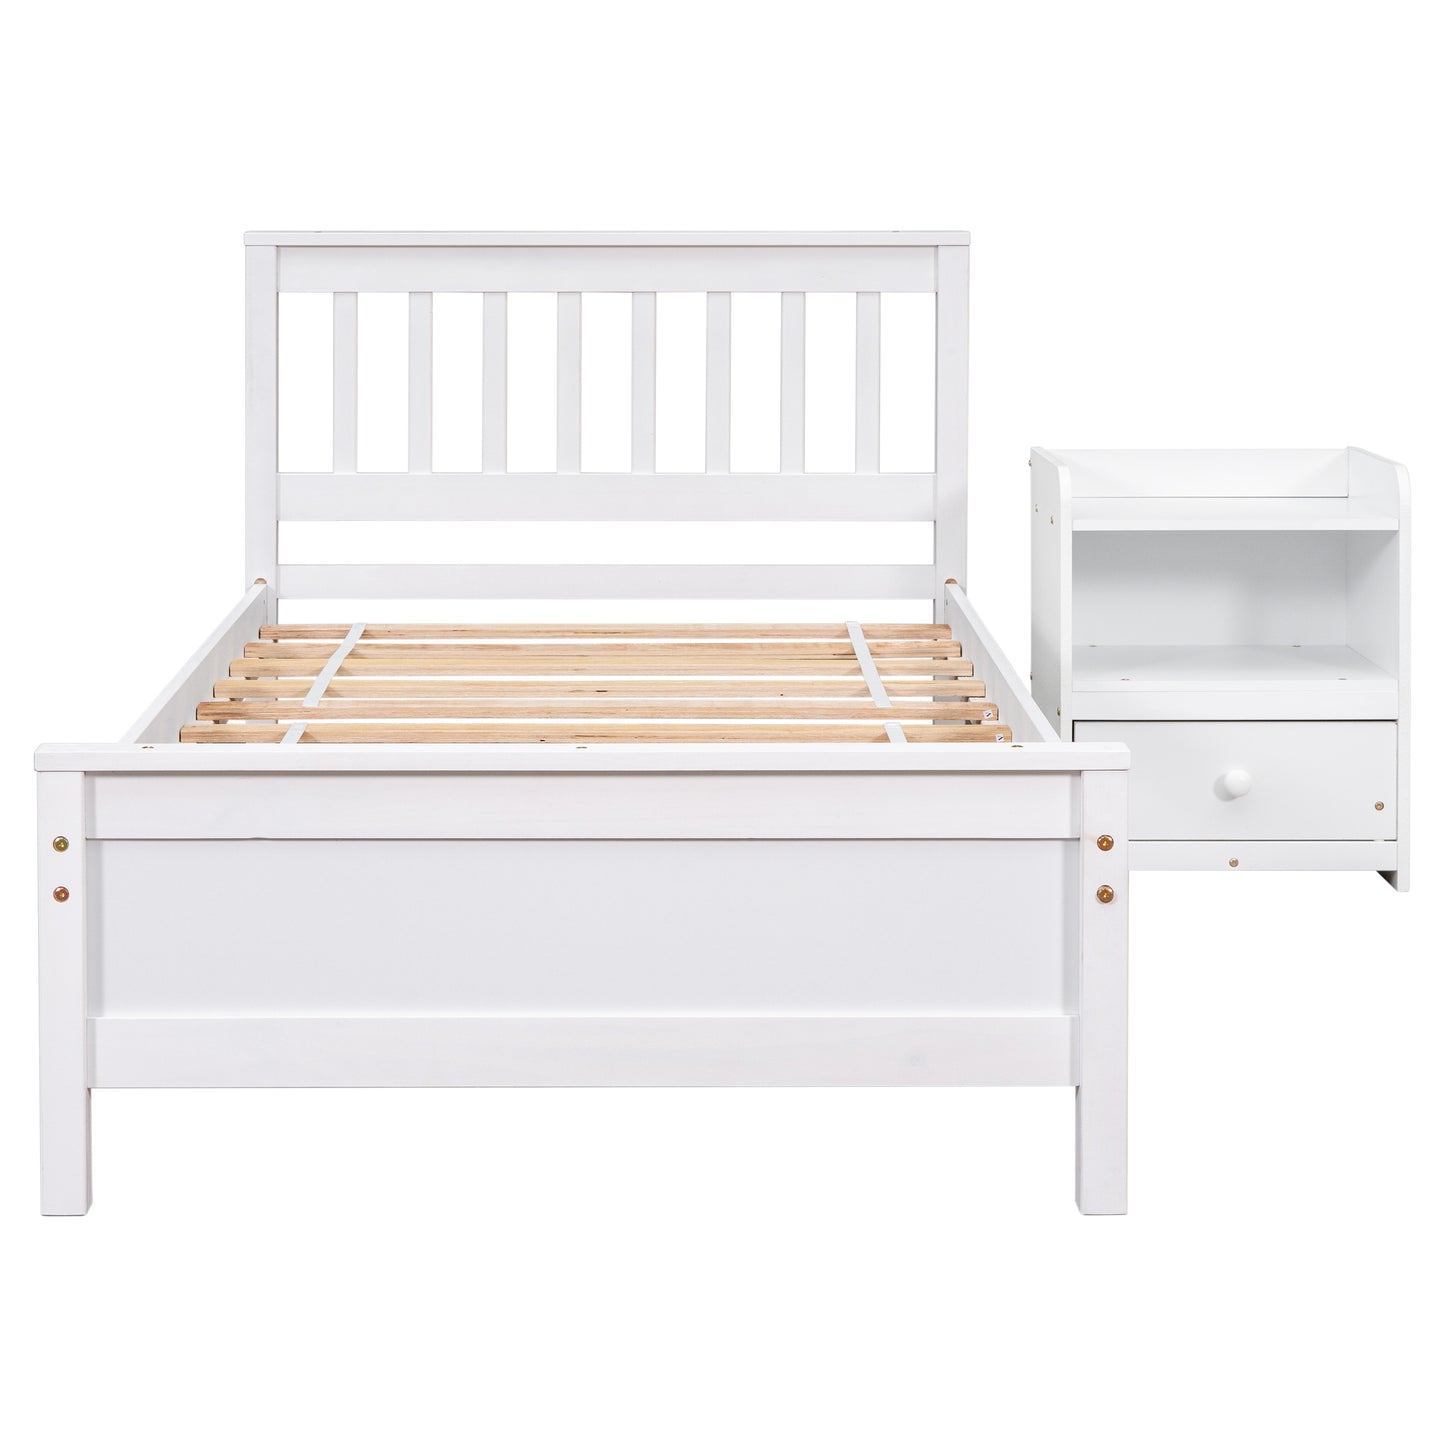 Twin Platform Bed with Headboard and Footboard with a Nightstand - Wite